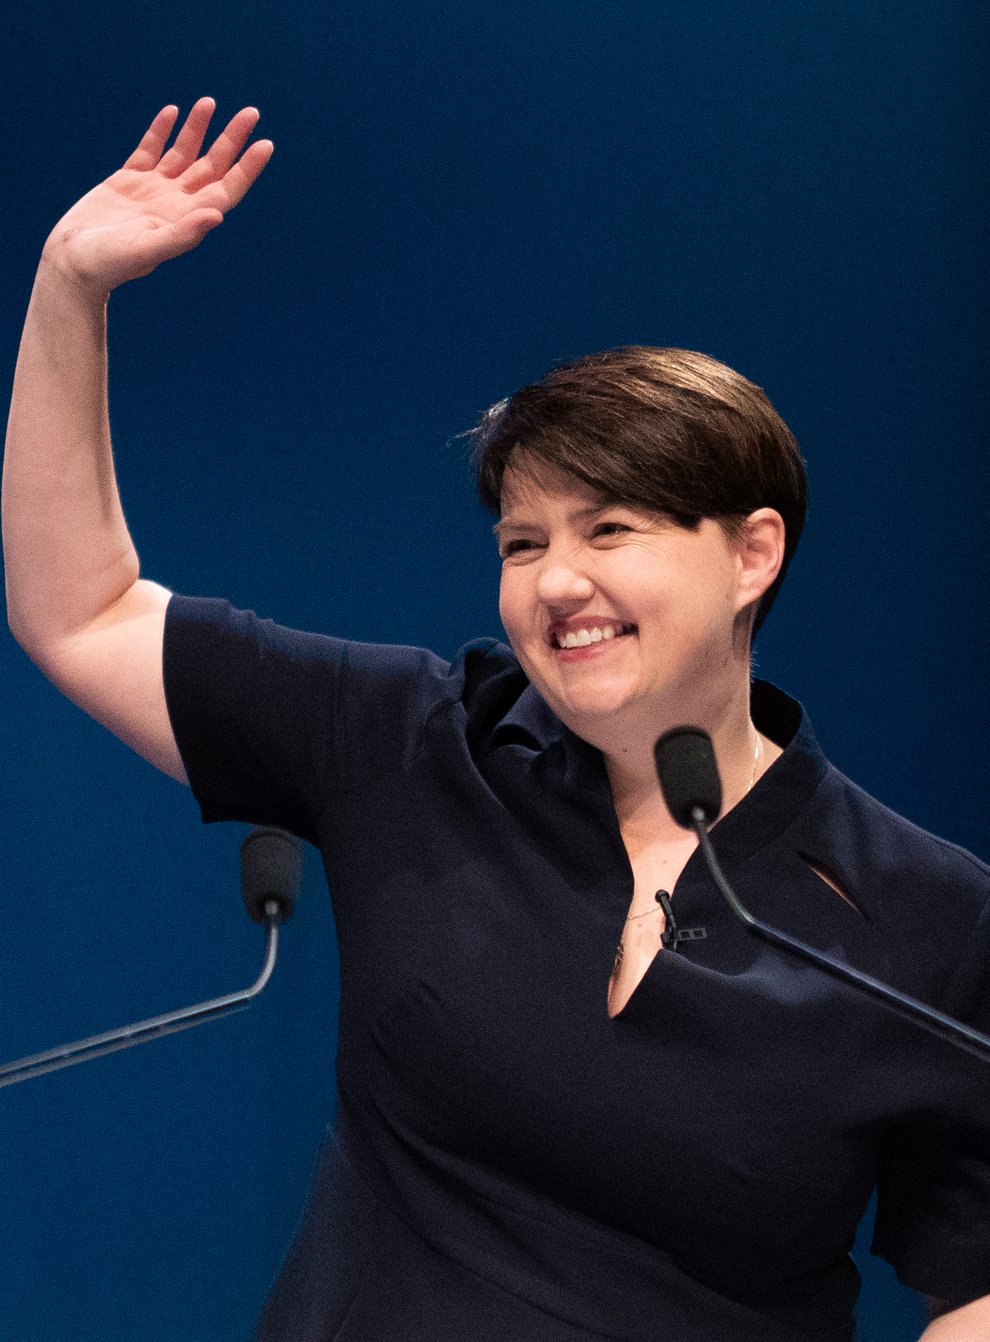 Ruth Davidson stepped down as Scottish Conservative leader in August 2019 (Jane Barlow/PA)